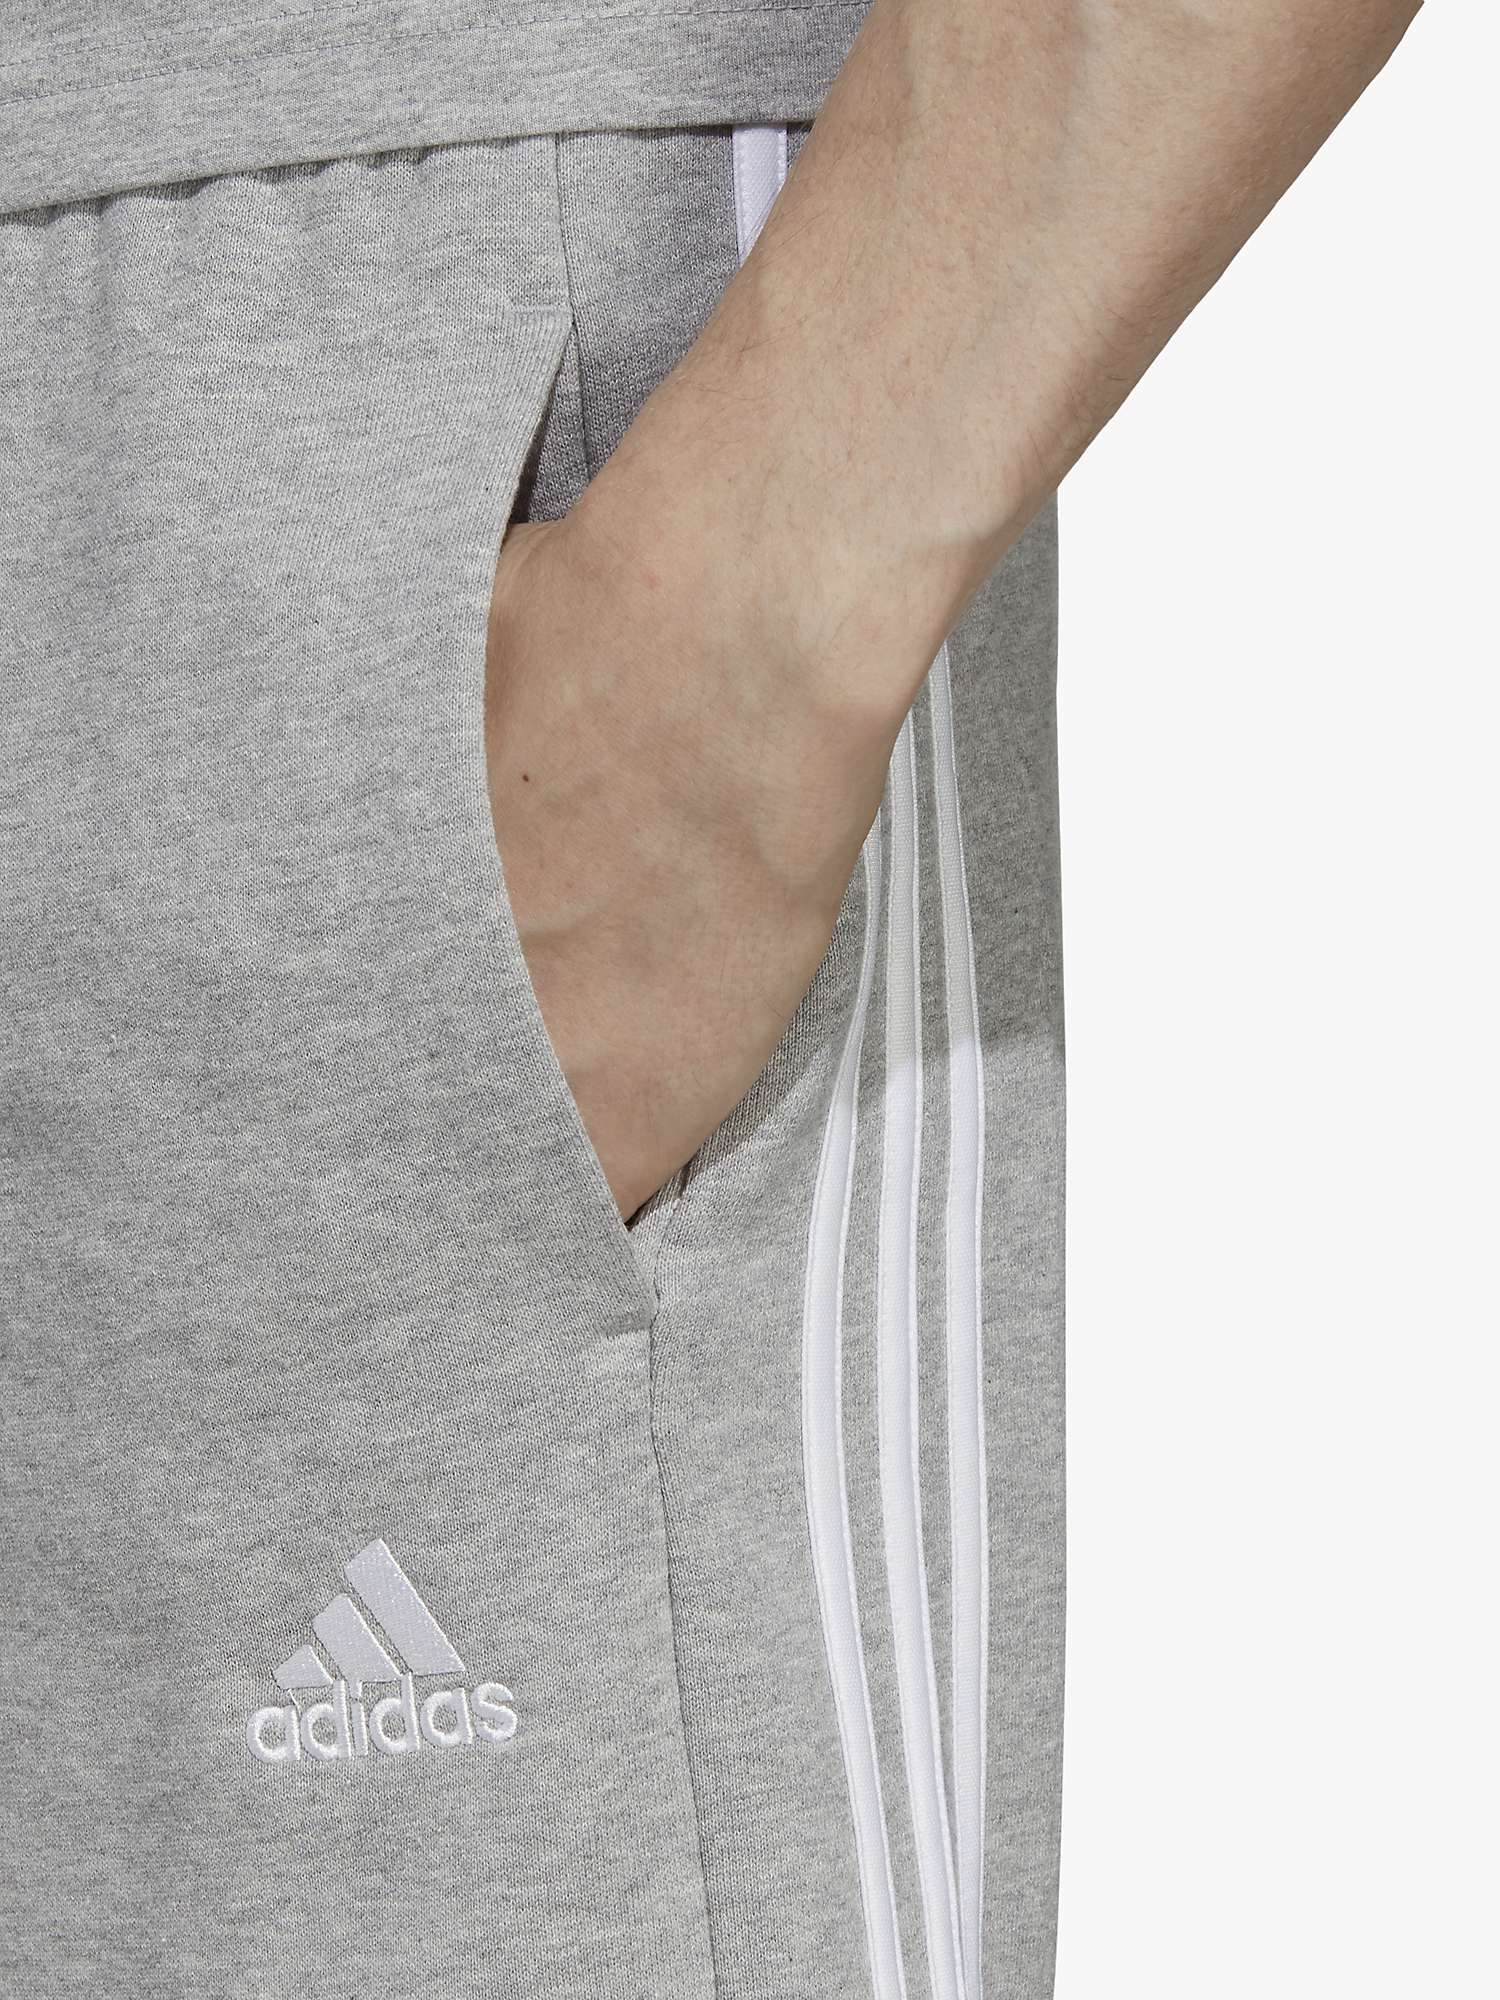 Buy adidas French Terry 3-Stripes Shorts Online at johnlewis.com